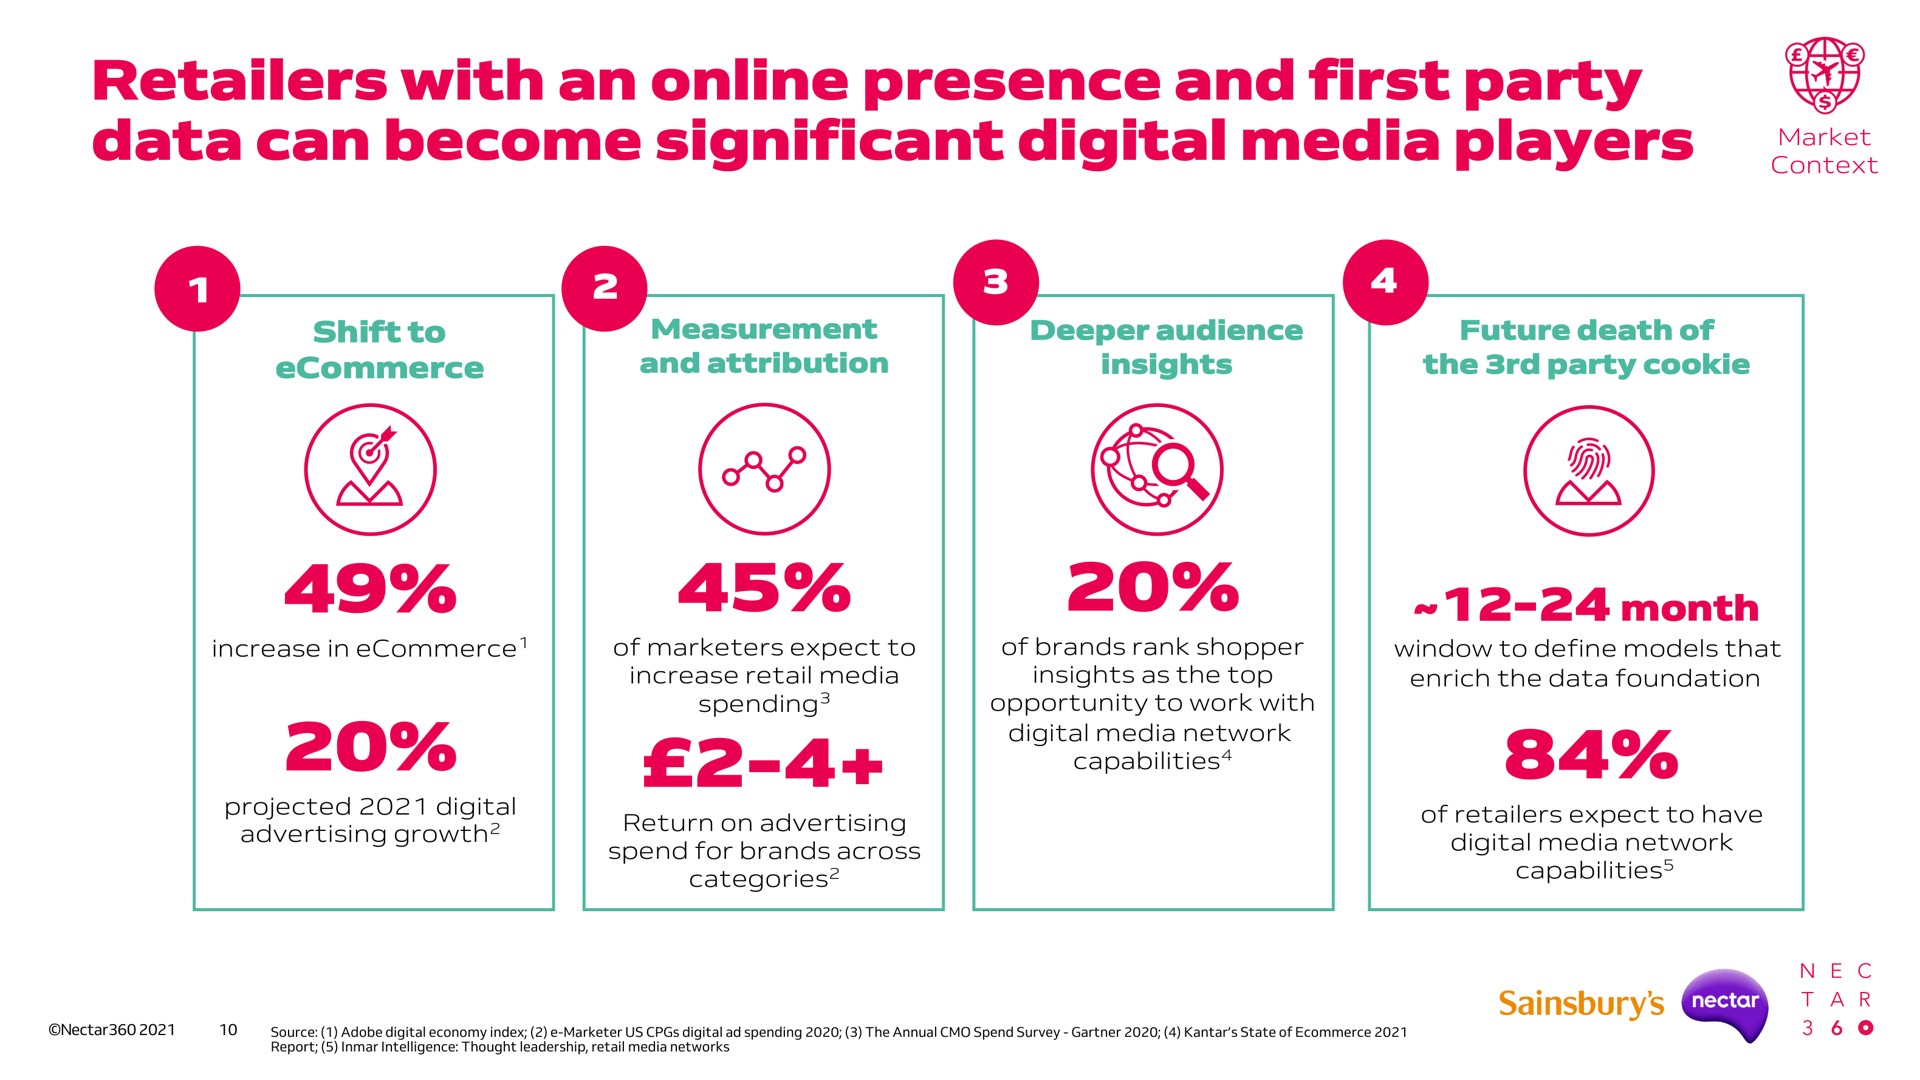 retailers with an presence and first party data can become significant digital media players | Sainsbury's